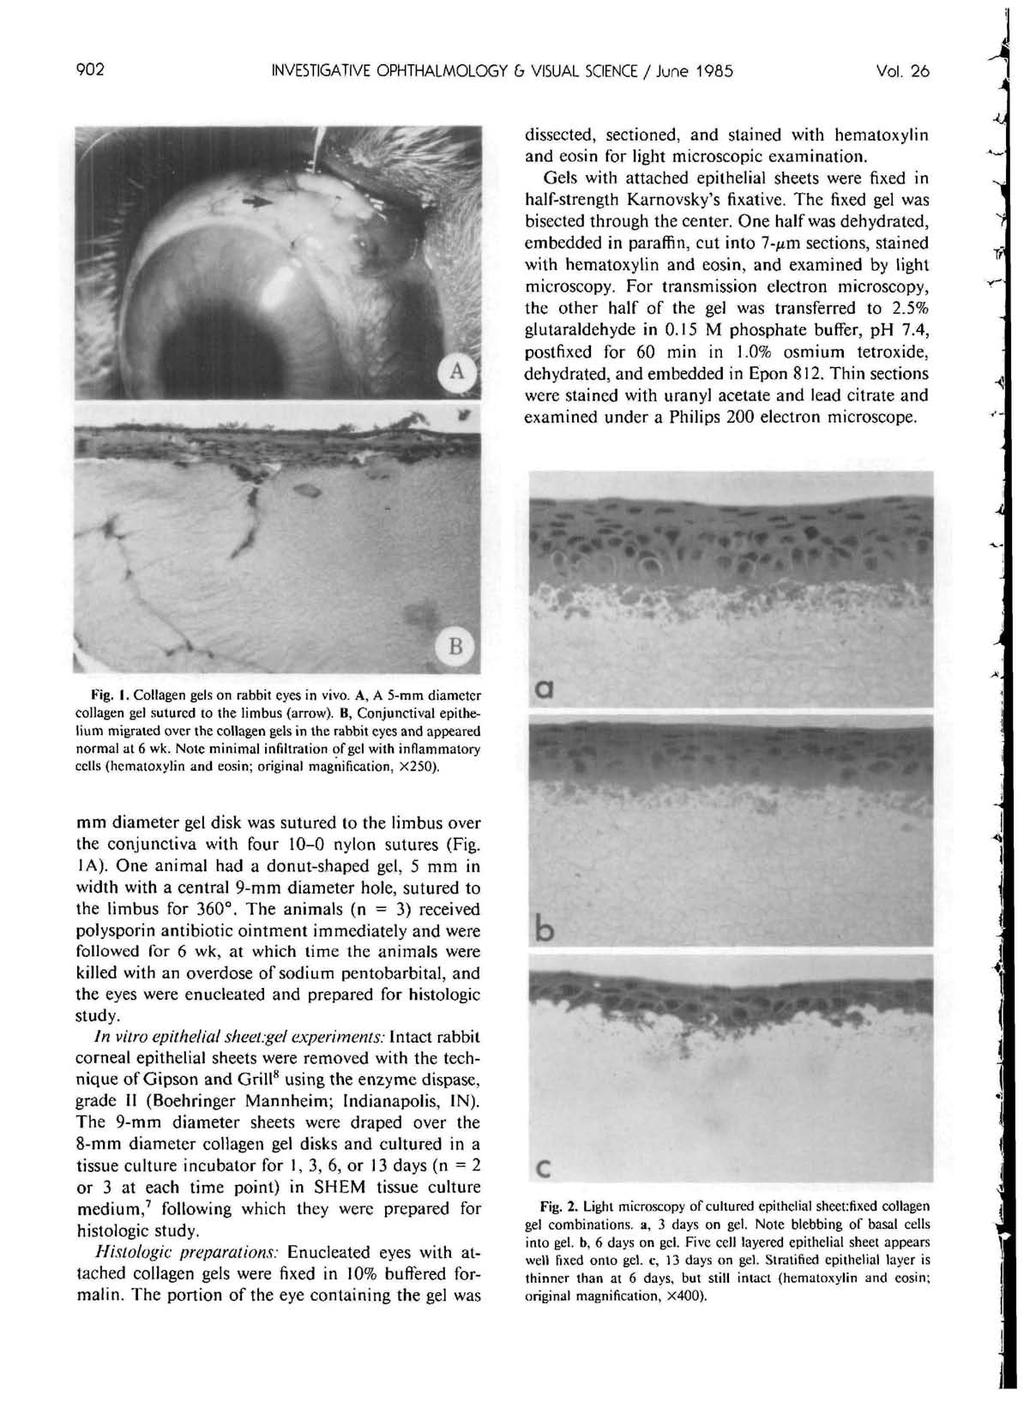 902 INVESTIGATIVE OPHTHALMOLOGY G VISUAL SCIENCE / June 1985 Vol. 26 dissected, sectioned, and stained with hematoxylin and eosin for light microscopic examination.